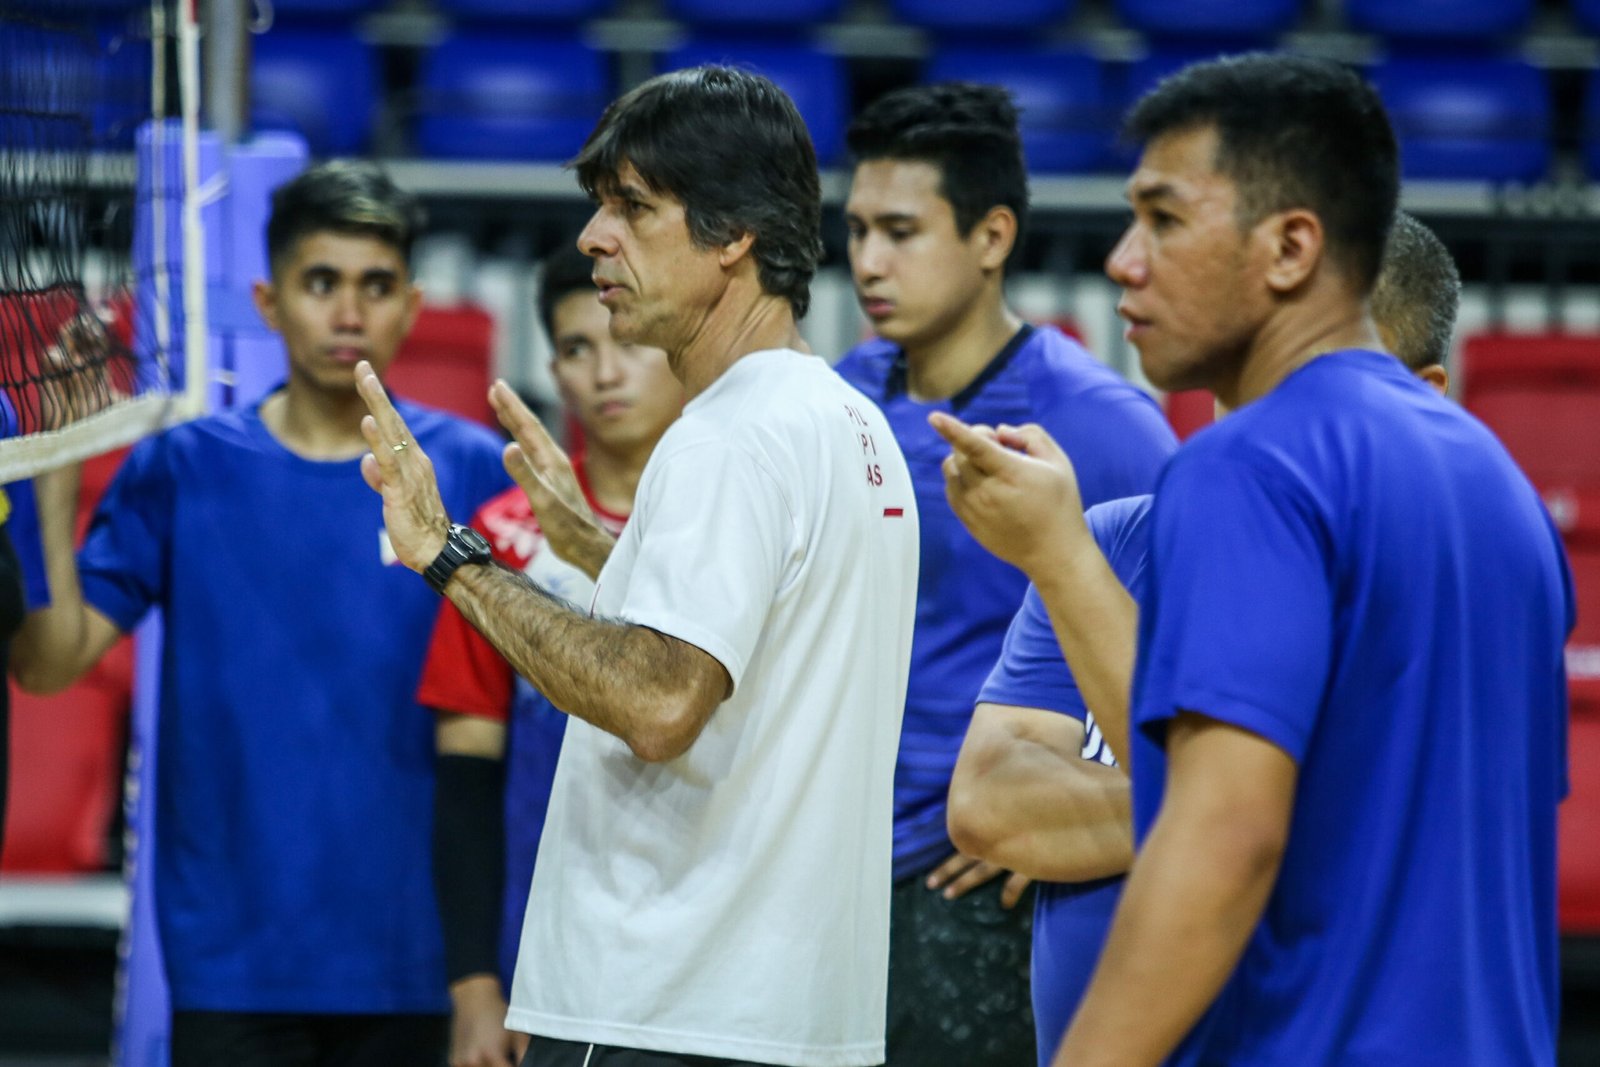 Sergio Veloso calls for unity as PH set to host FIVB men’s worlds